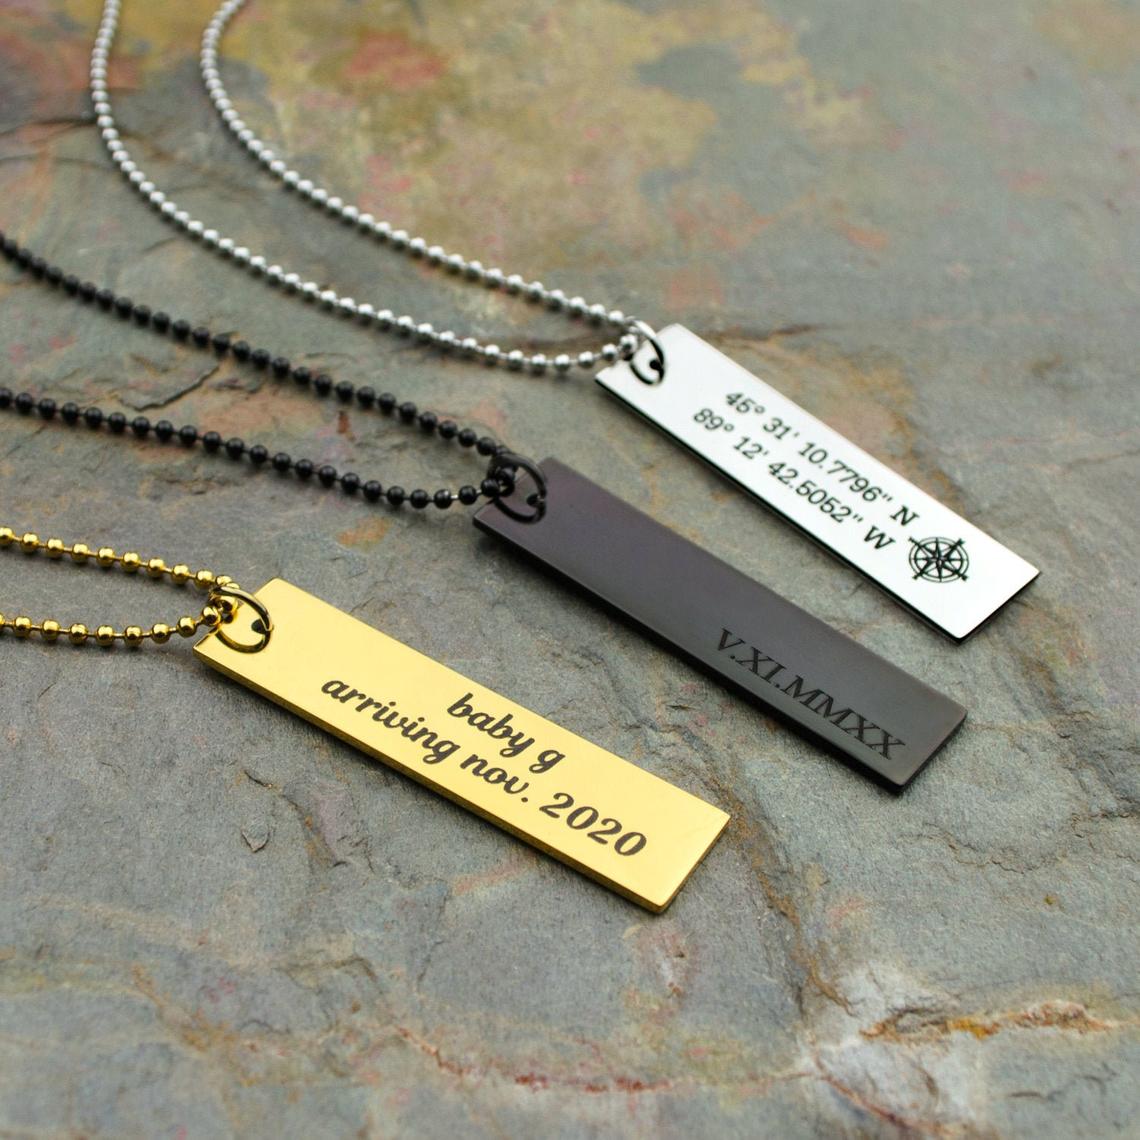 Customizable Military ID Necklace